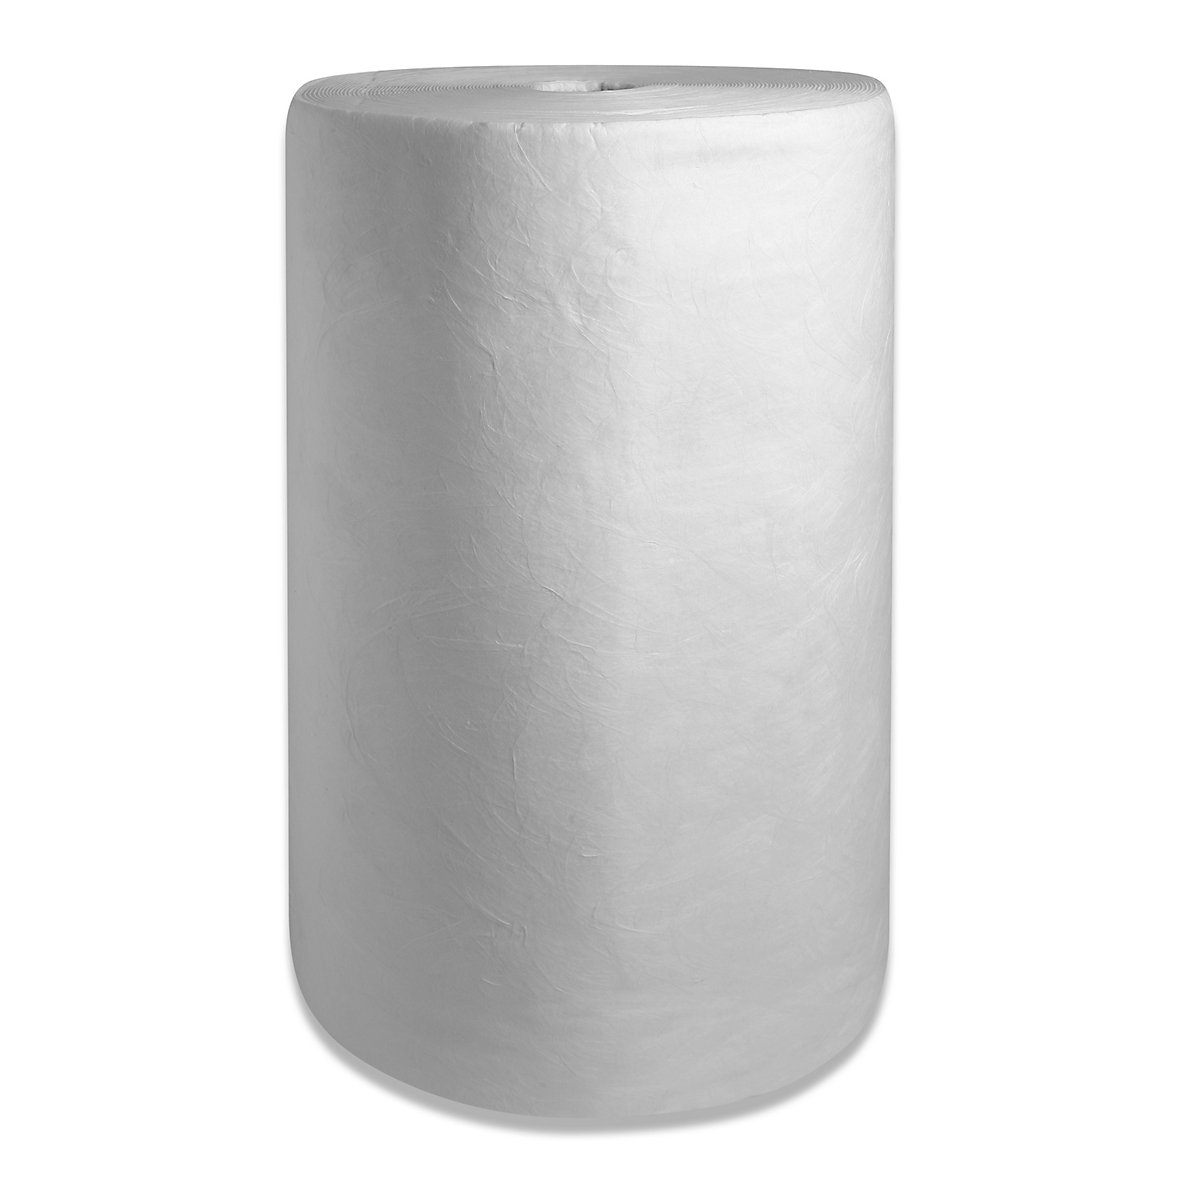 FIRST absorbent sheeting